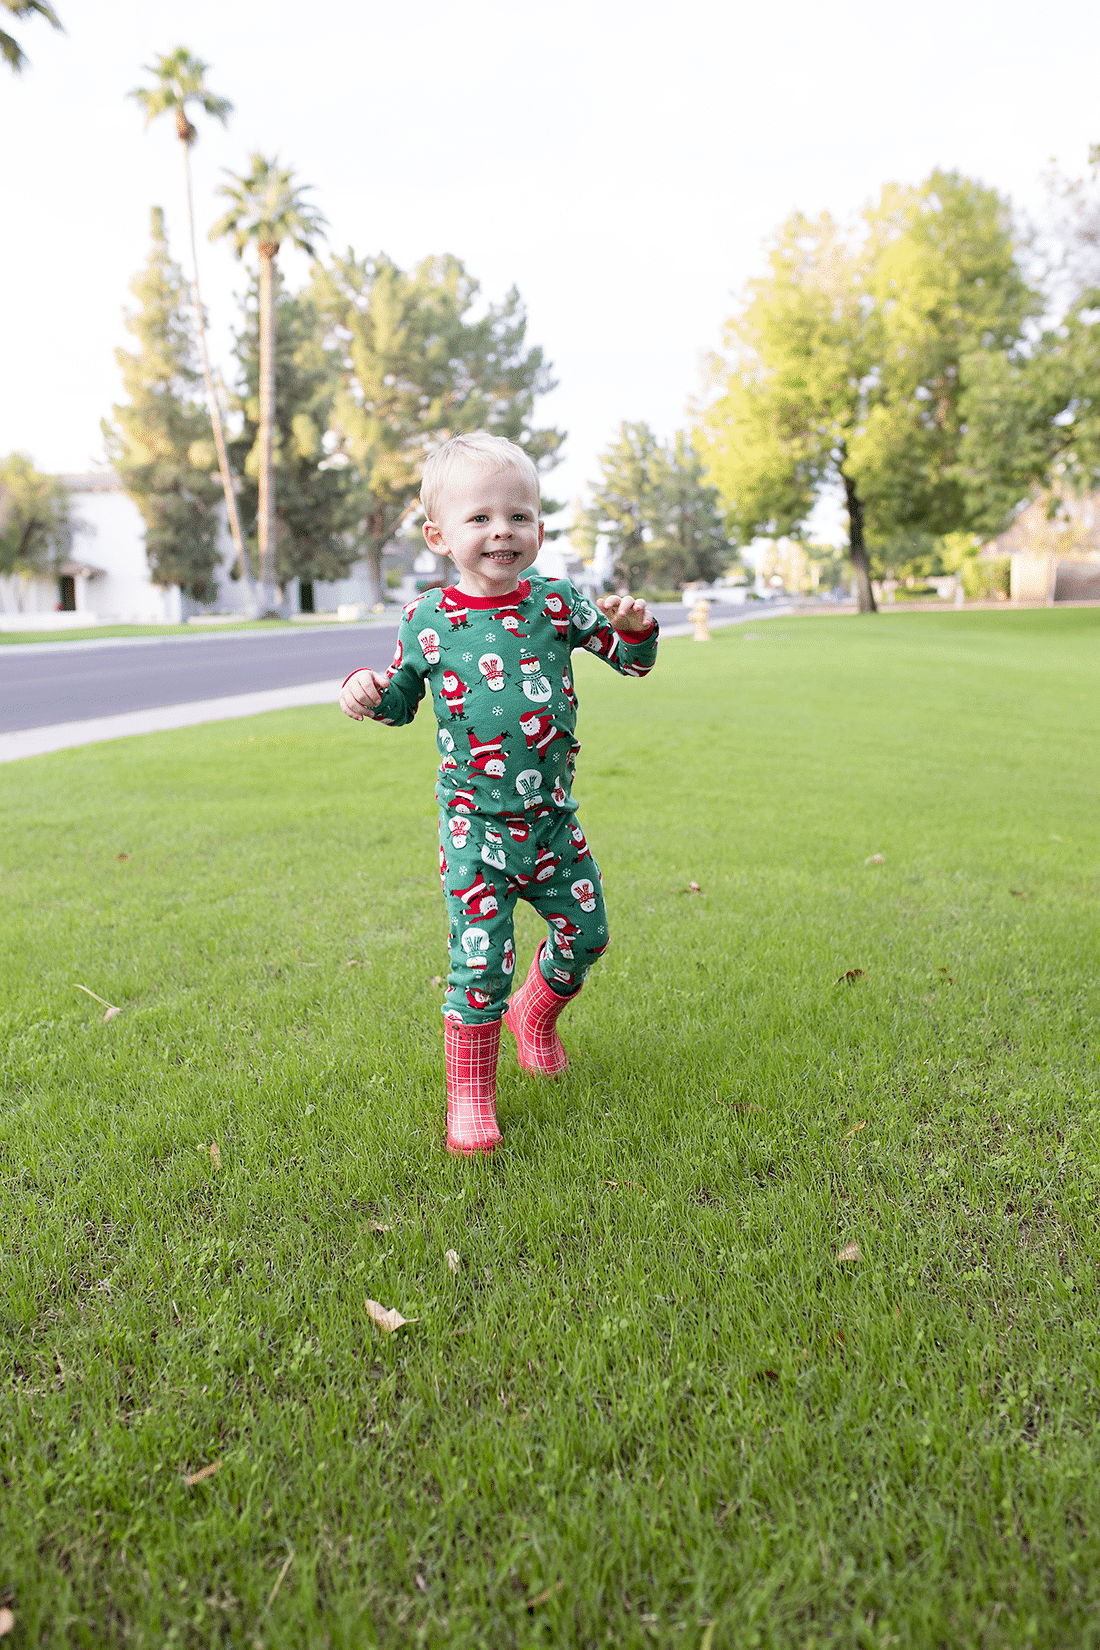 It’s Holiday Jammies Time!